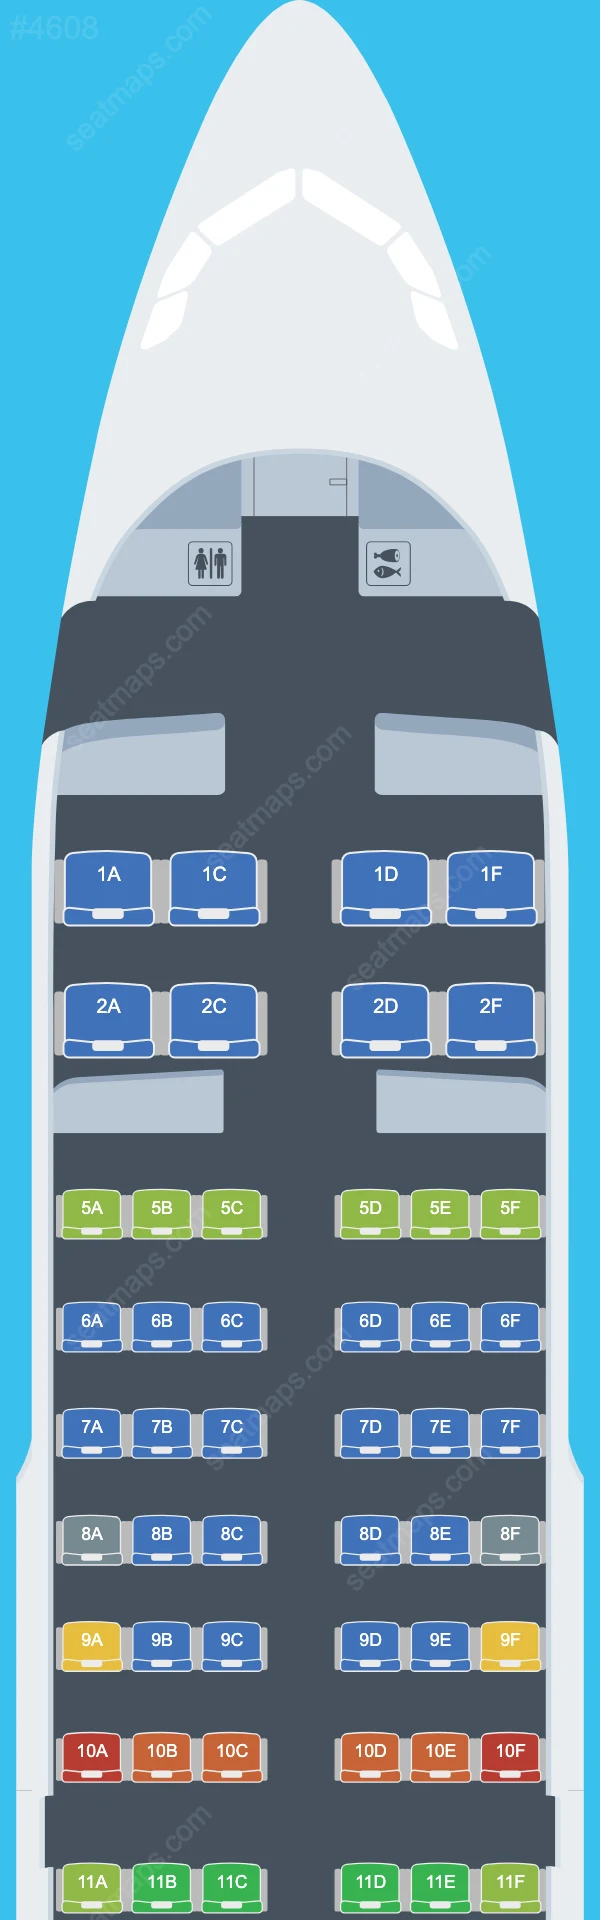 Tibet Airlines Airbus A319 Seat Maps A319-100